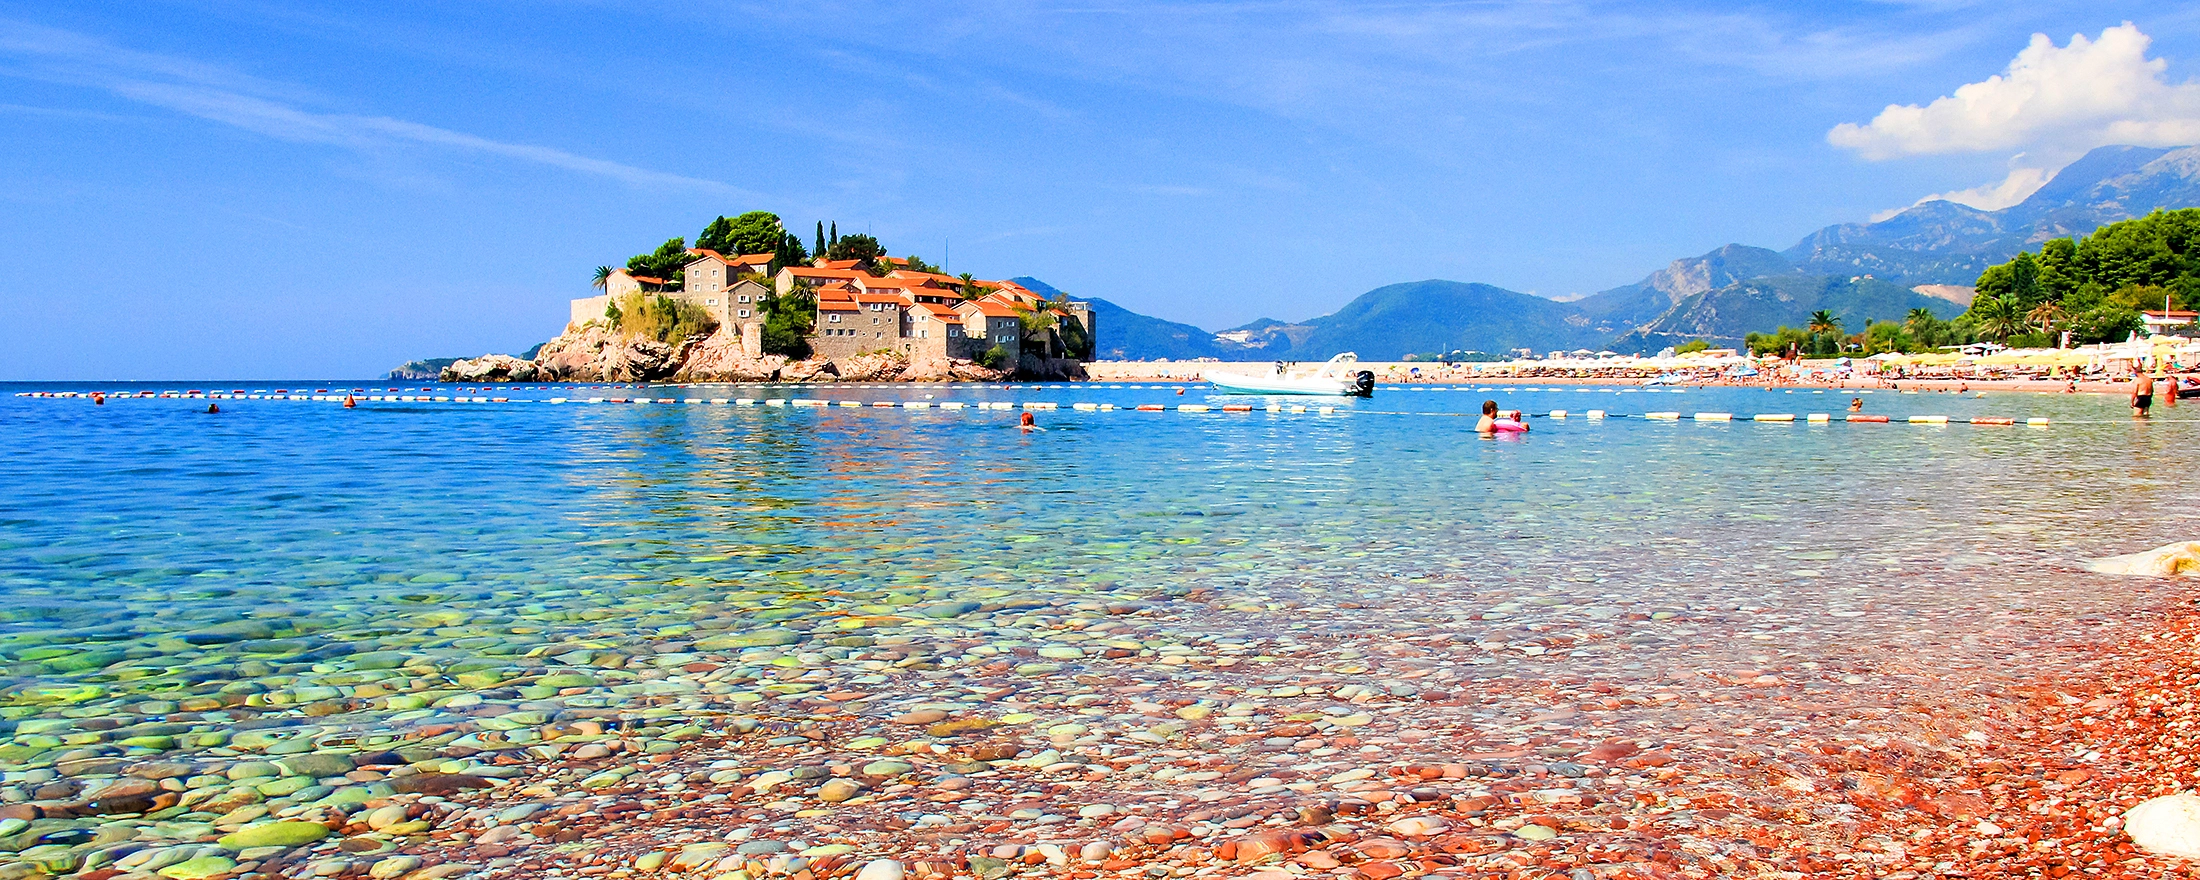 HERO_Sveti-Stefan-beach-and-island-on-the-Adriatic-sea-Montenegro_Credit_GettyImages-649782836-1